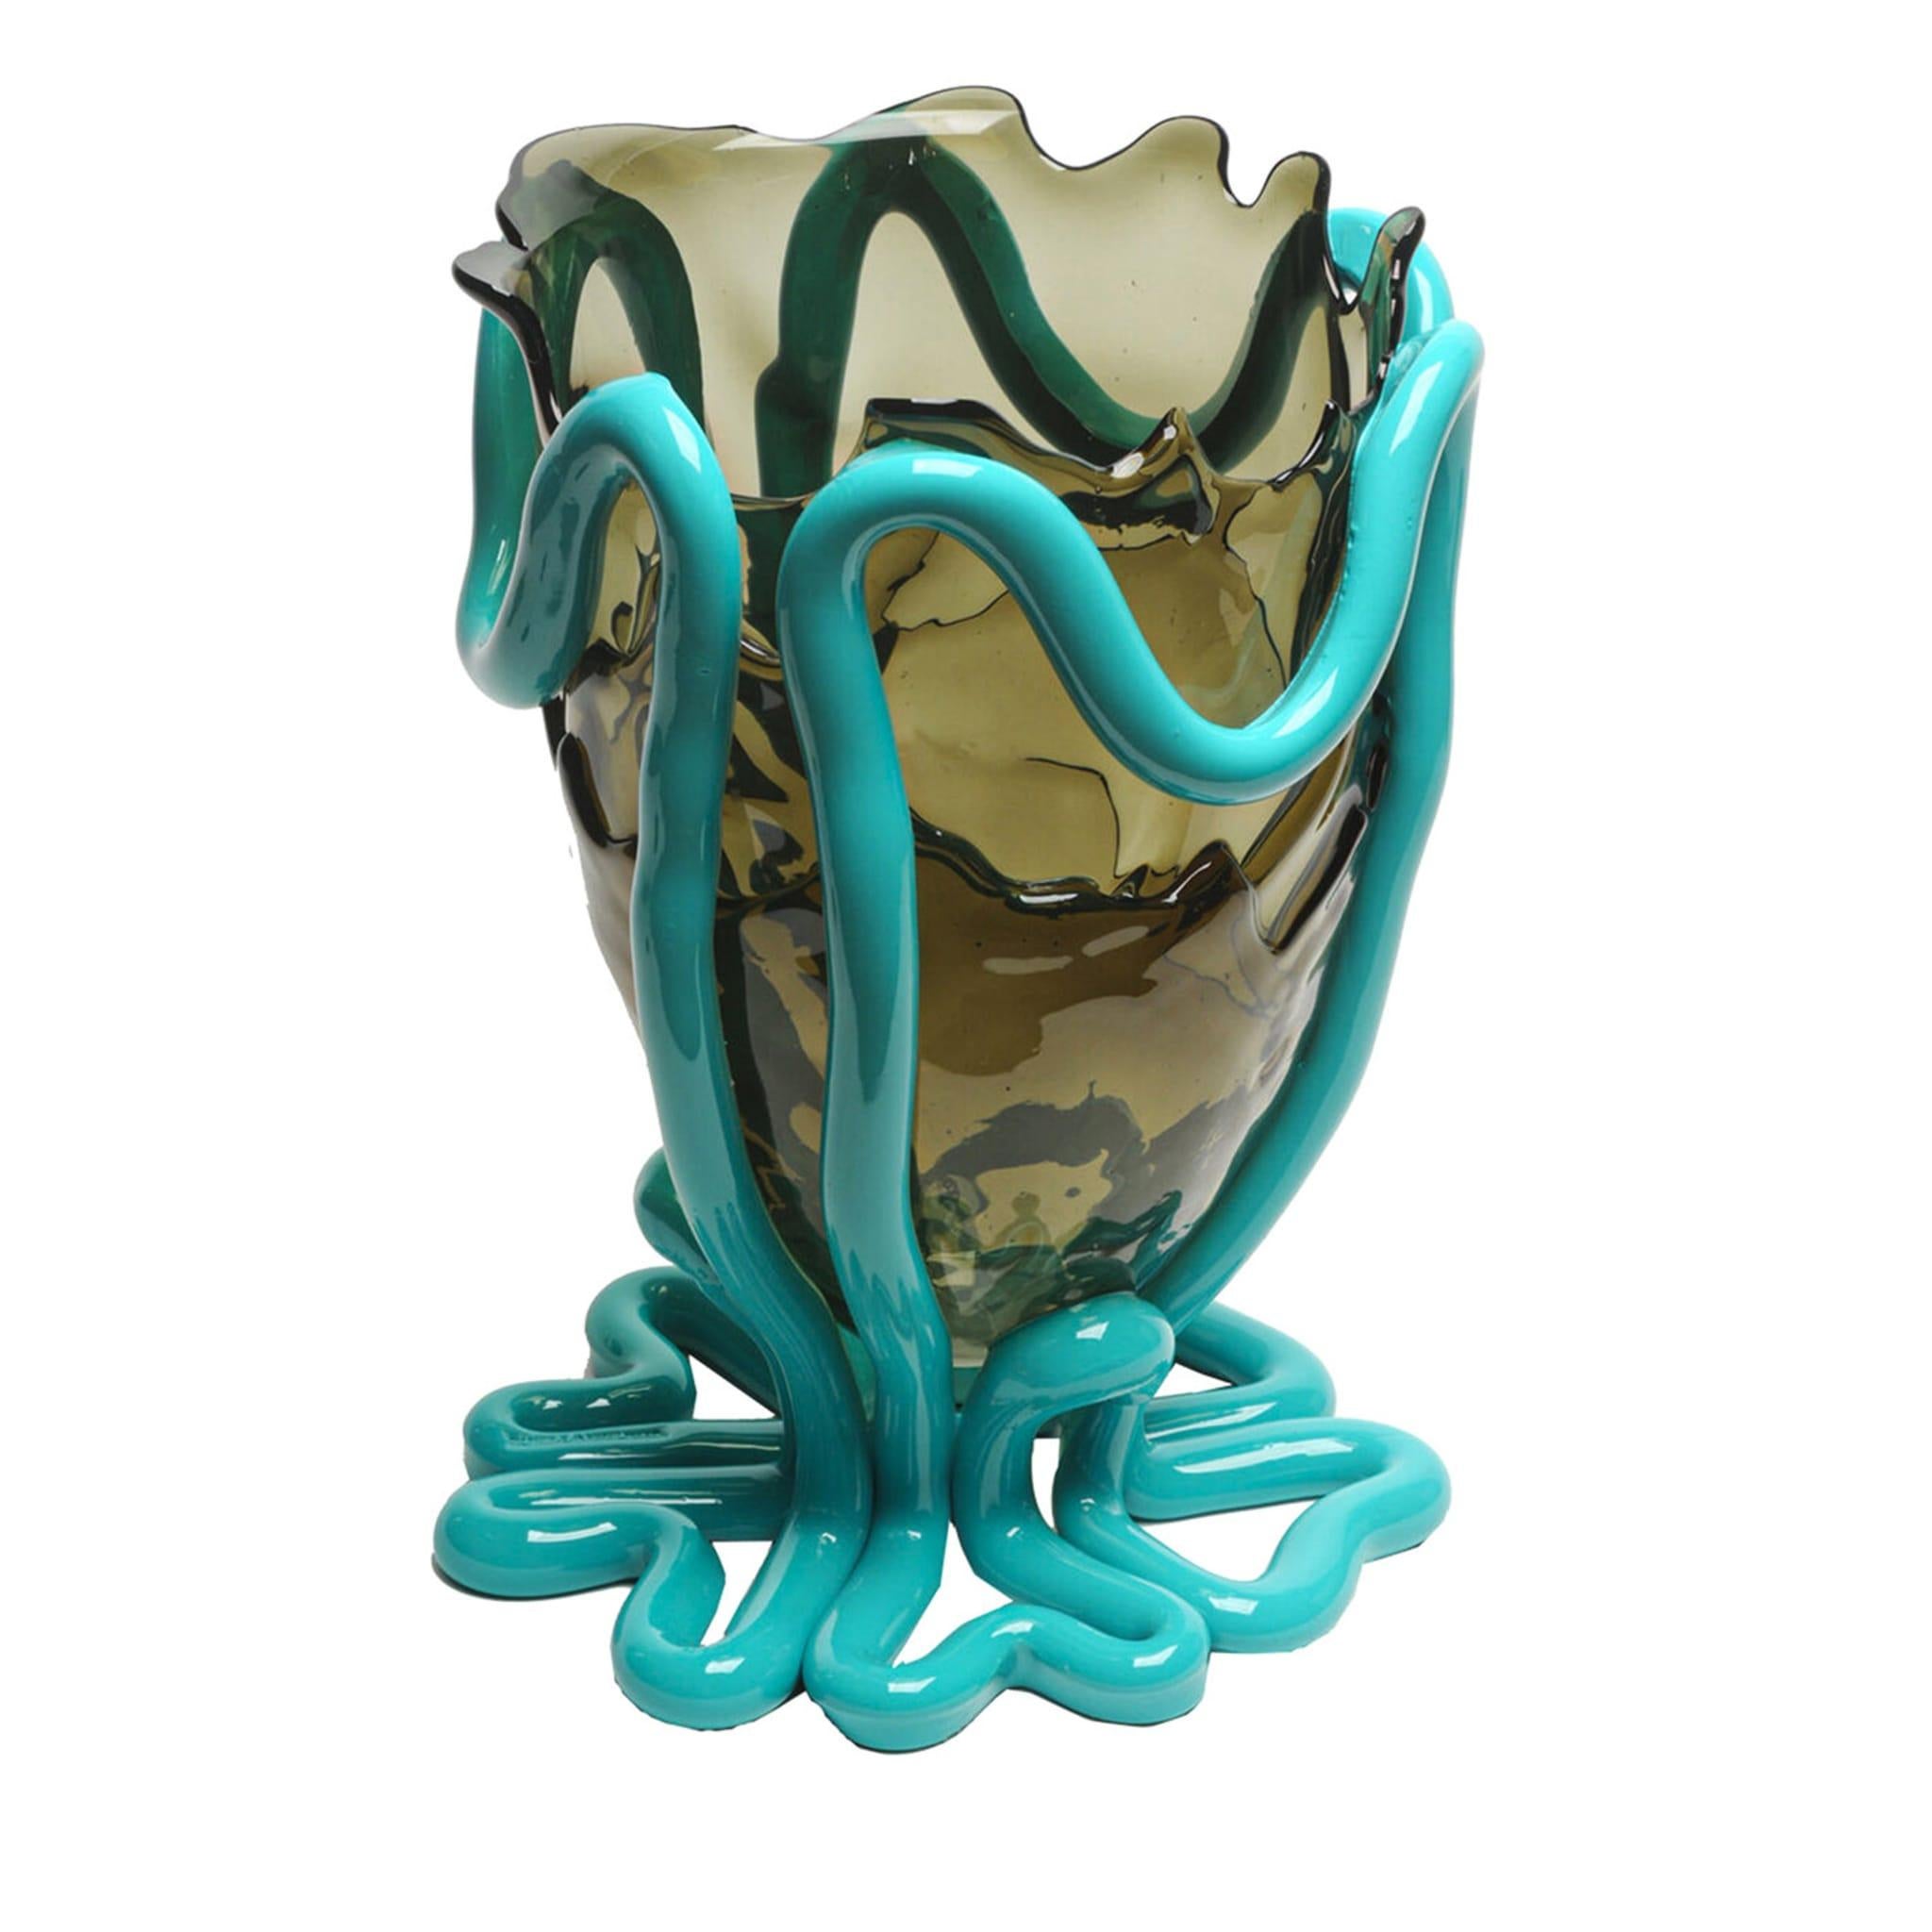 The extraordinary result of the precious partnership between Gaetano Pesce and Corsi Design, this vase is a distinctive, unique piece from the Fish Design Collection. Entirely crafted of soft resin, it flaunts fascinating, nature-inspired shapes of